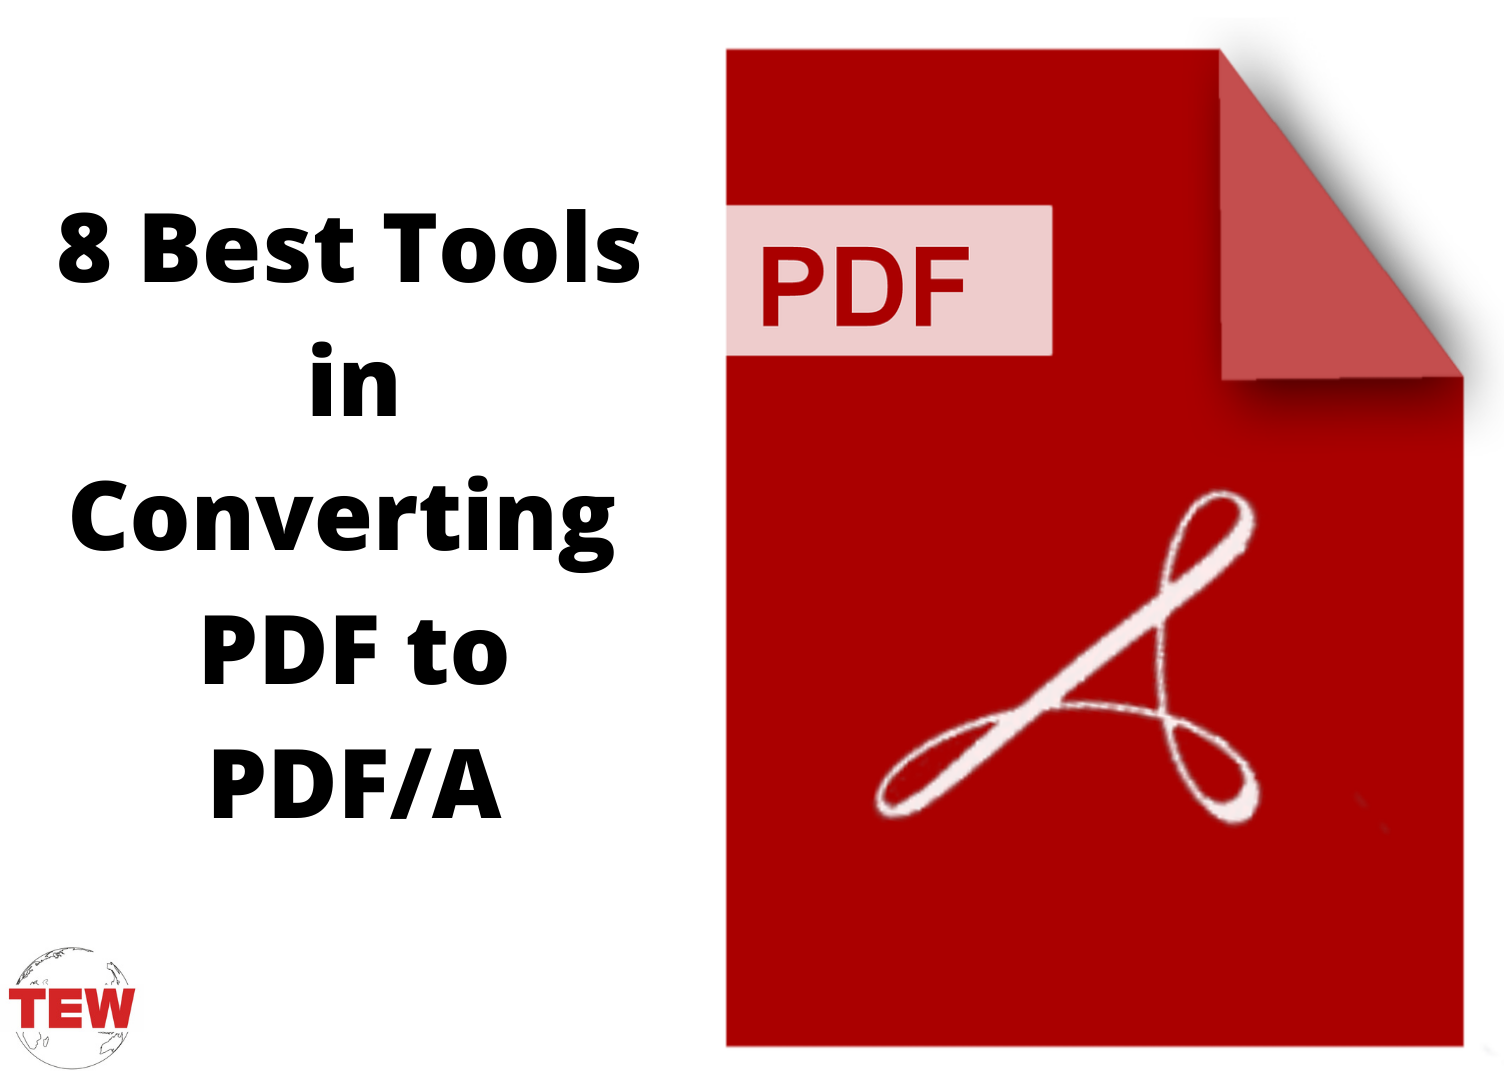 8 Best Tools in Converting PDF to PDF/A